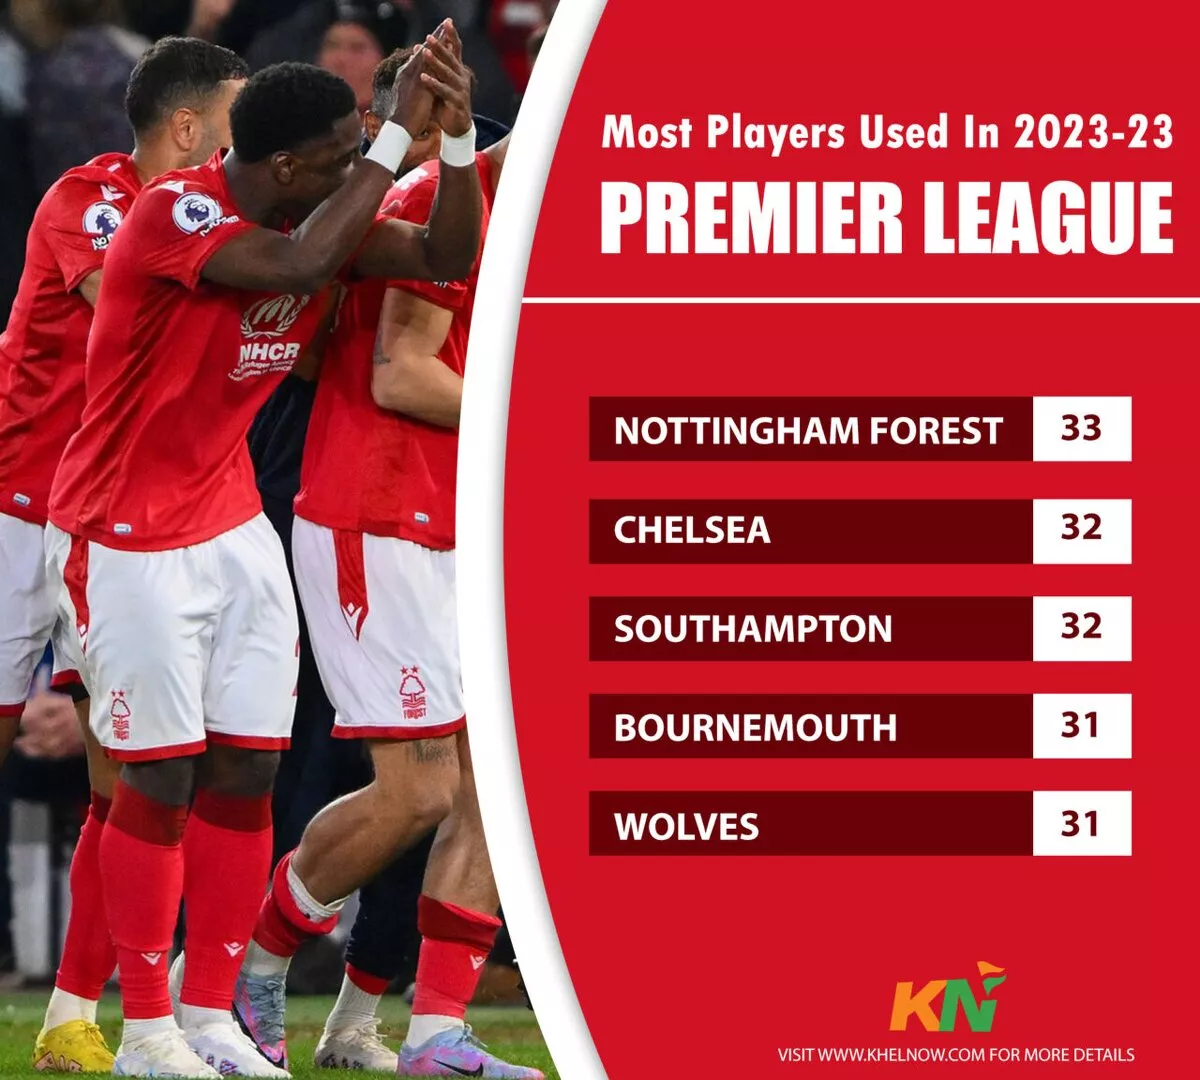 Premier League clubs that have used most players